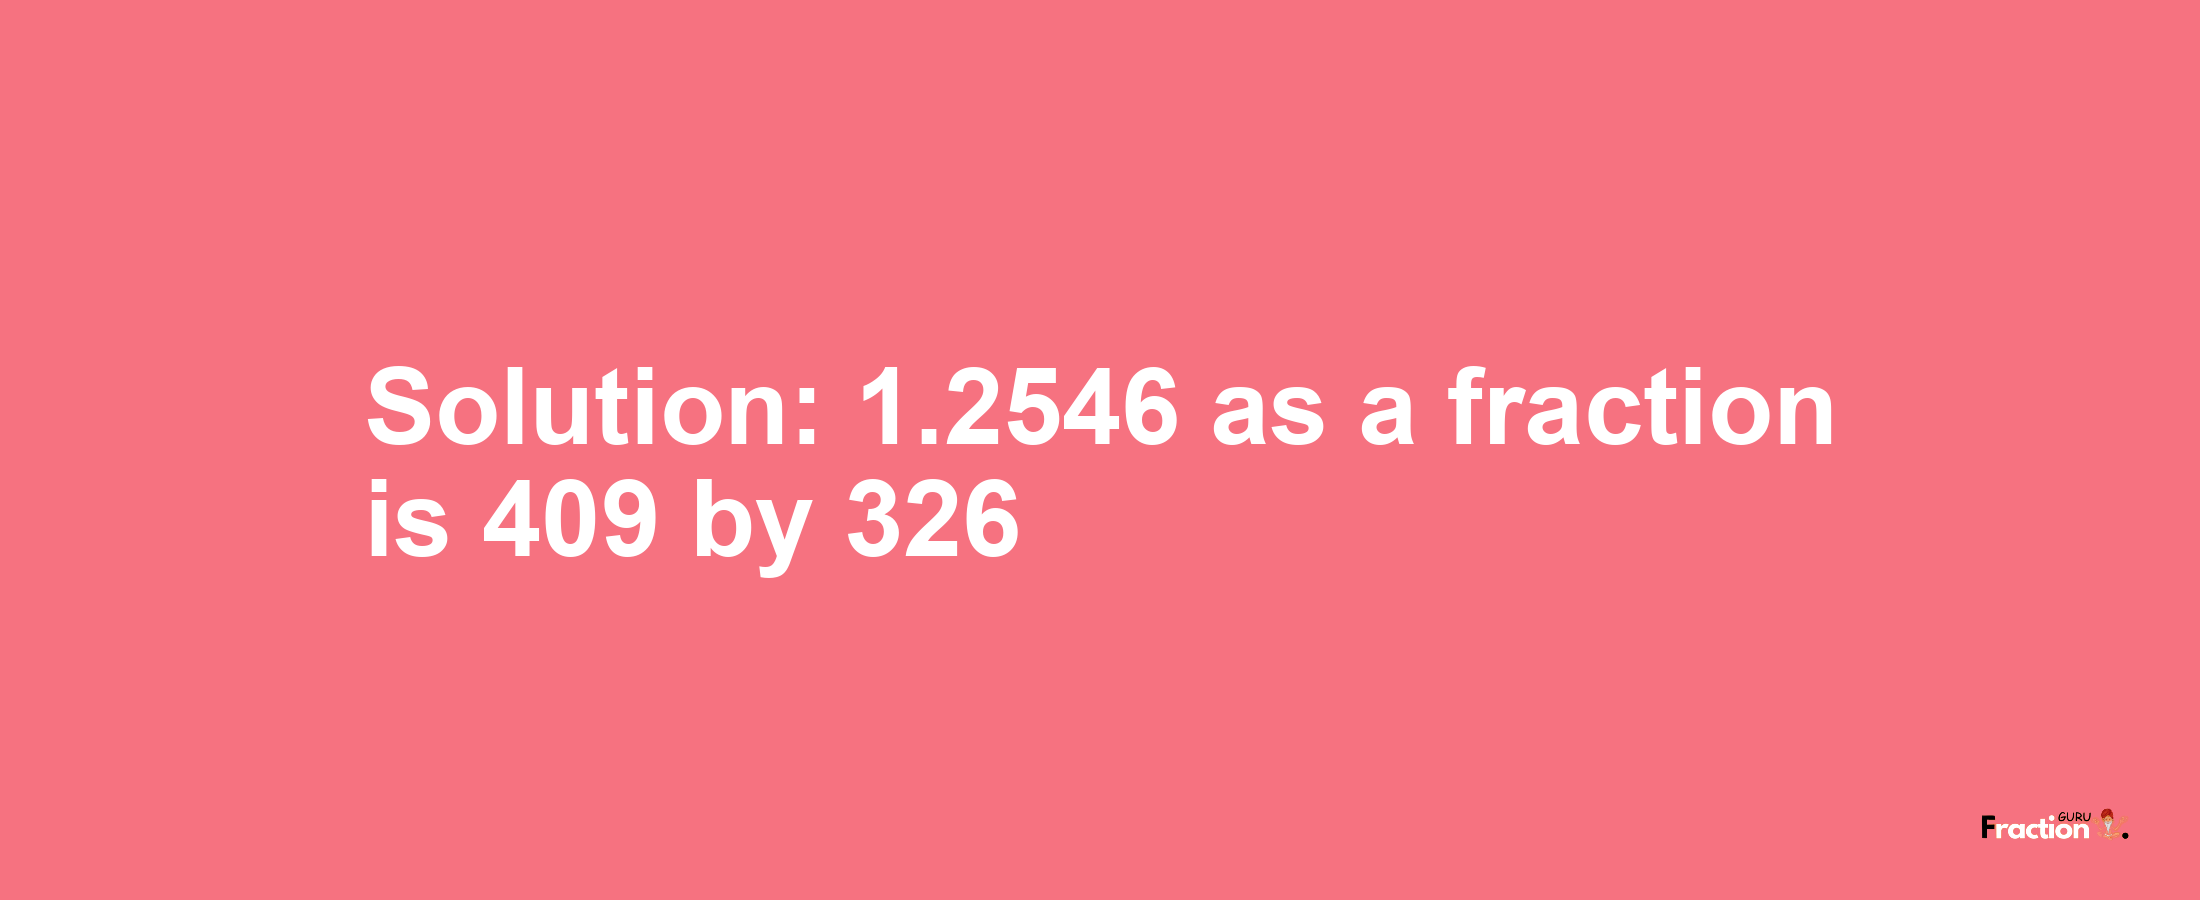 Solution:1.2546 as a fraction is 409/326